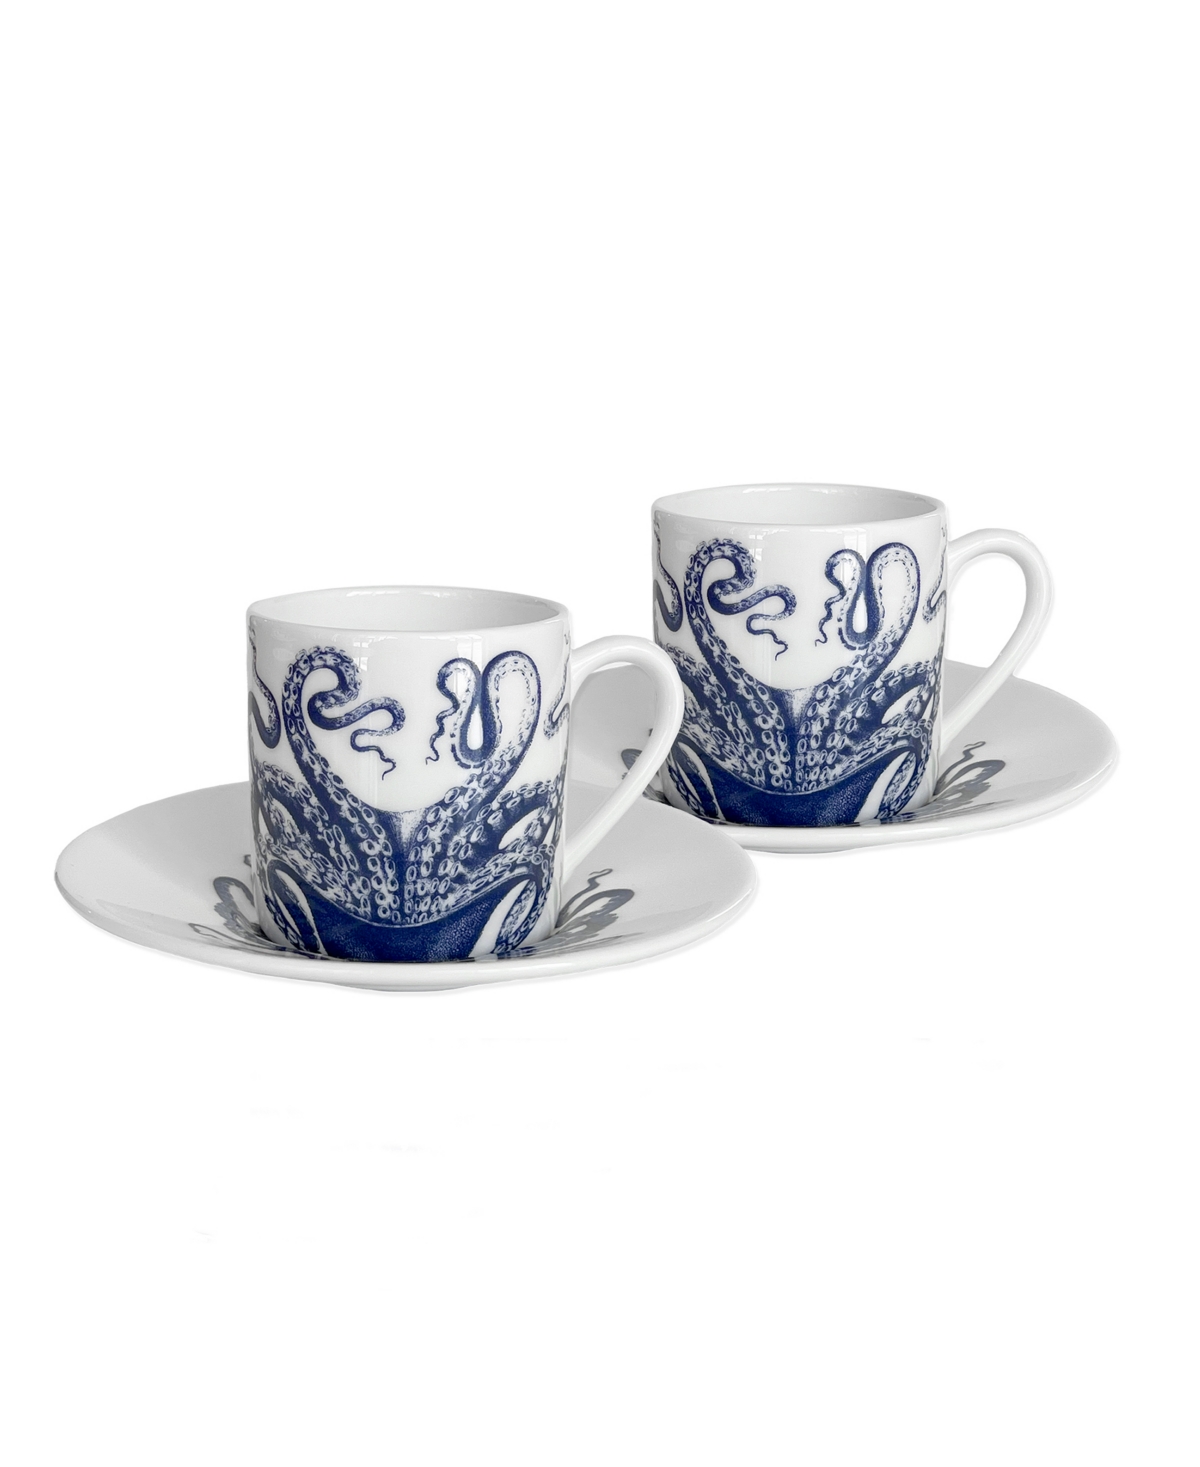 Lucy Octopus Espresso Cup and Saucer 4 oz, Set of 2 - Blue on White